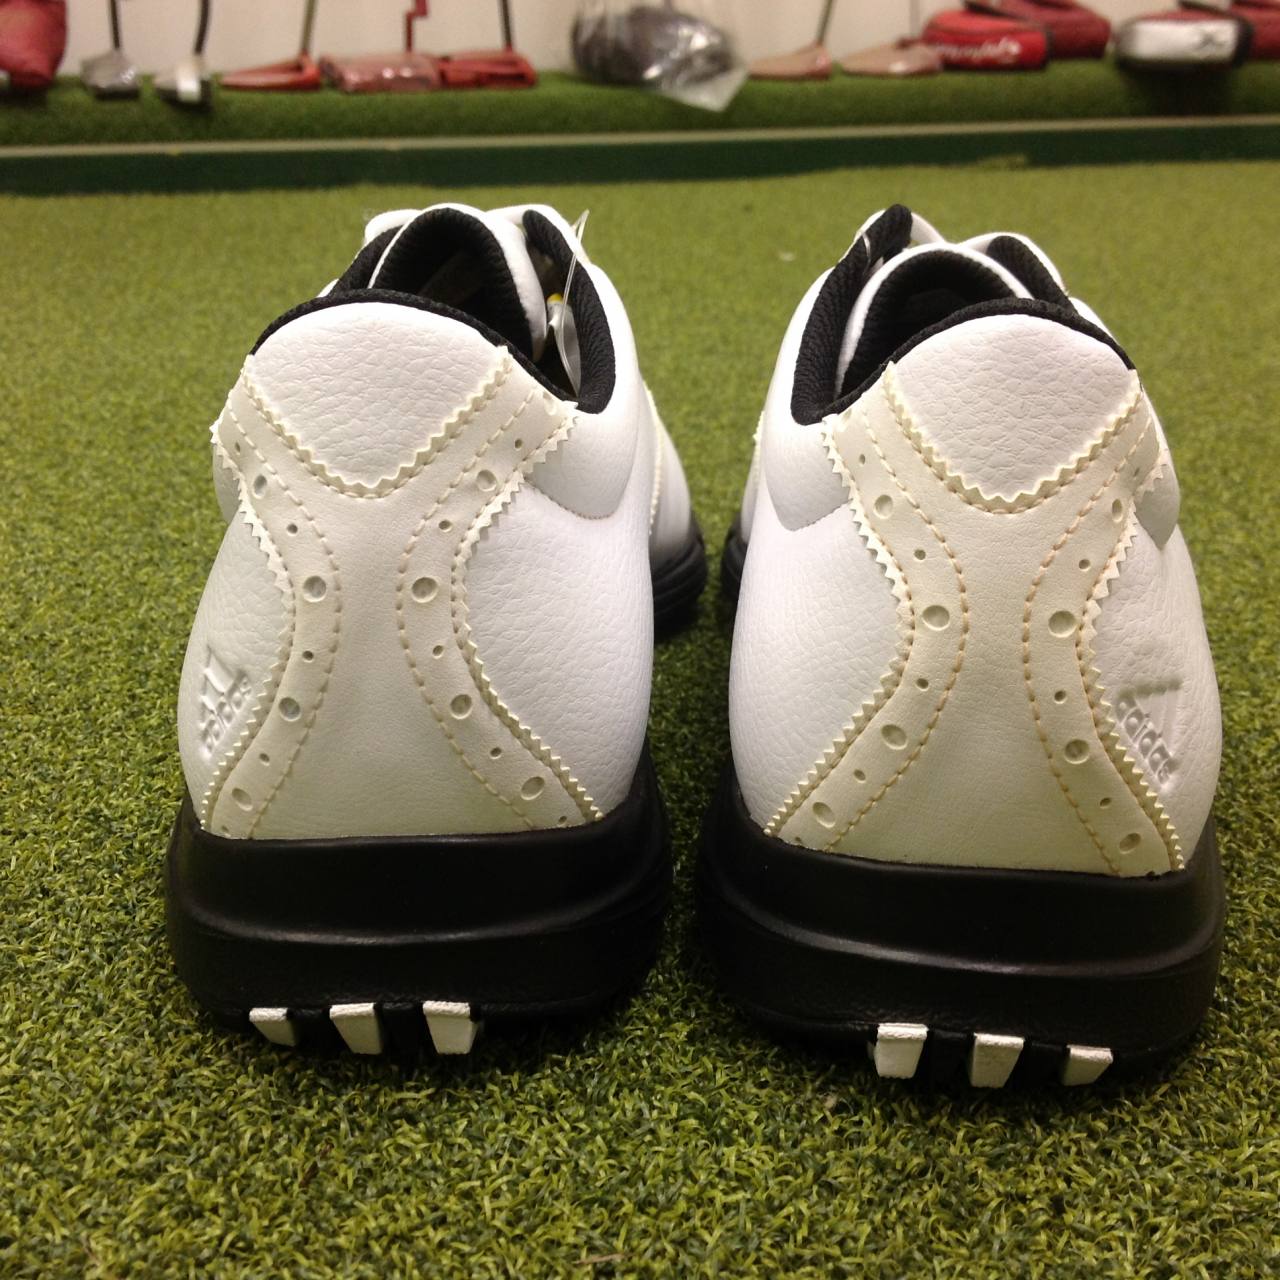 NEW Adidas Golflite 5Z Golf Shoes – UK 